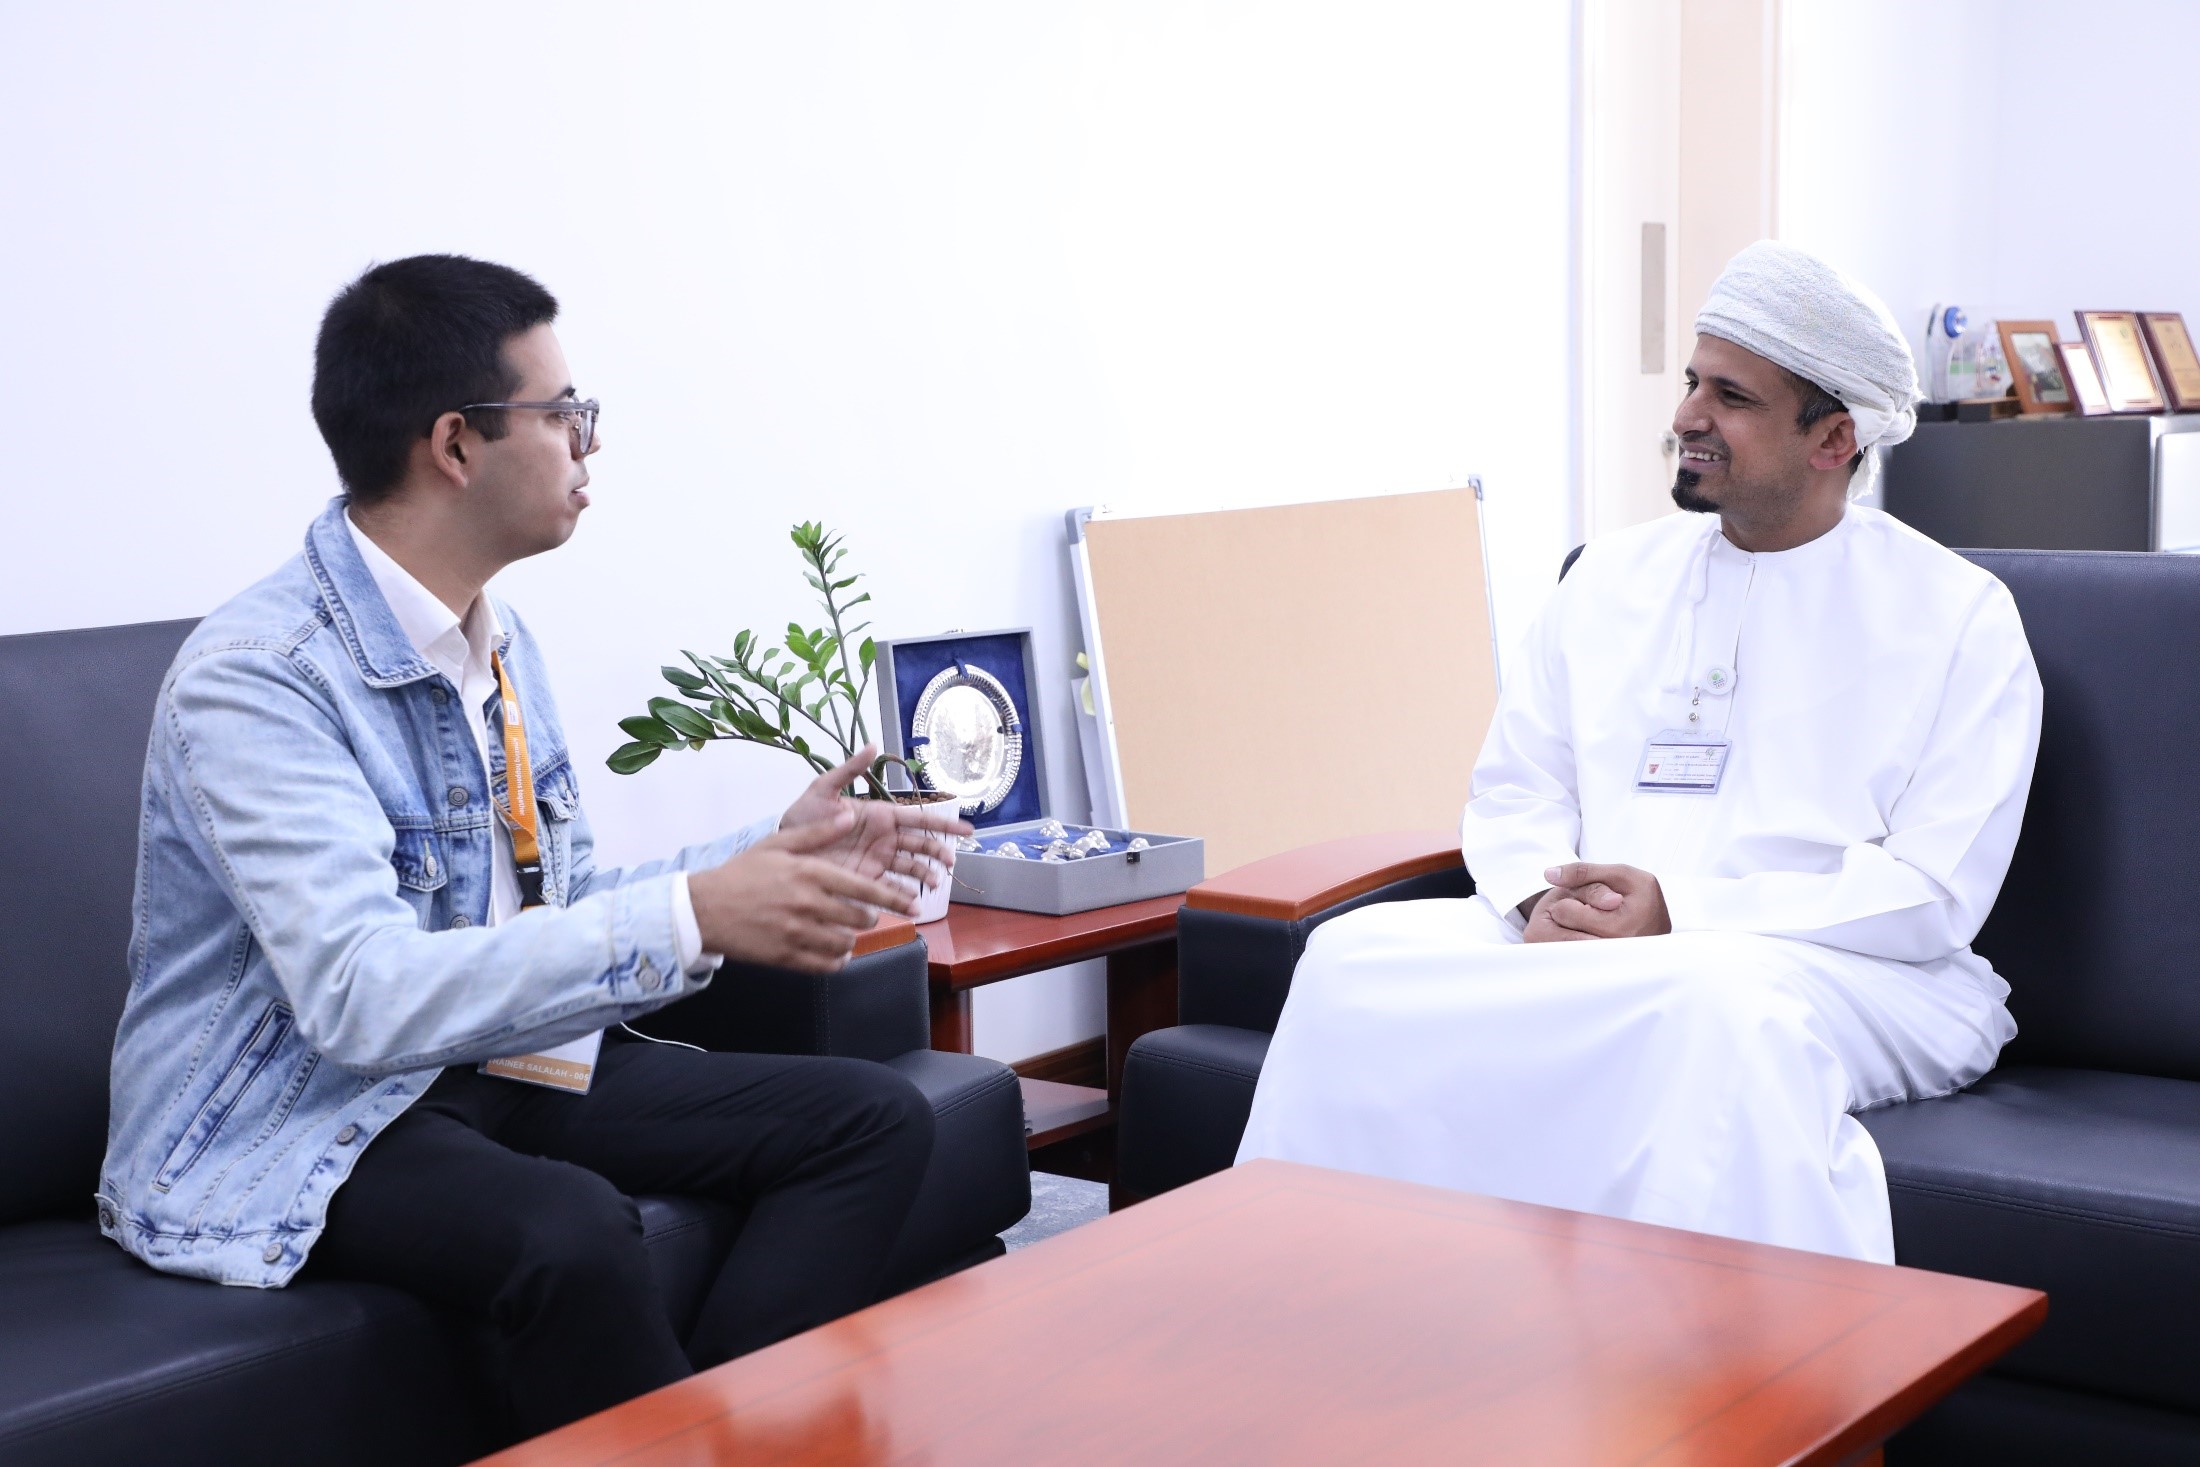 Dhofar University has proven to be an excellent choice for my internship.